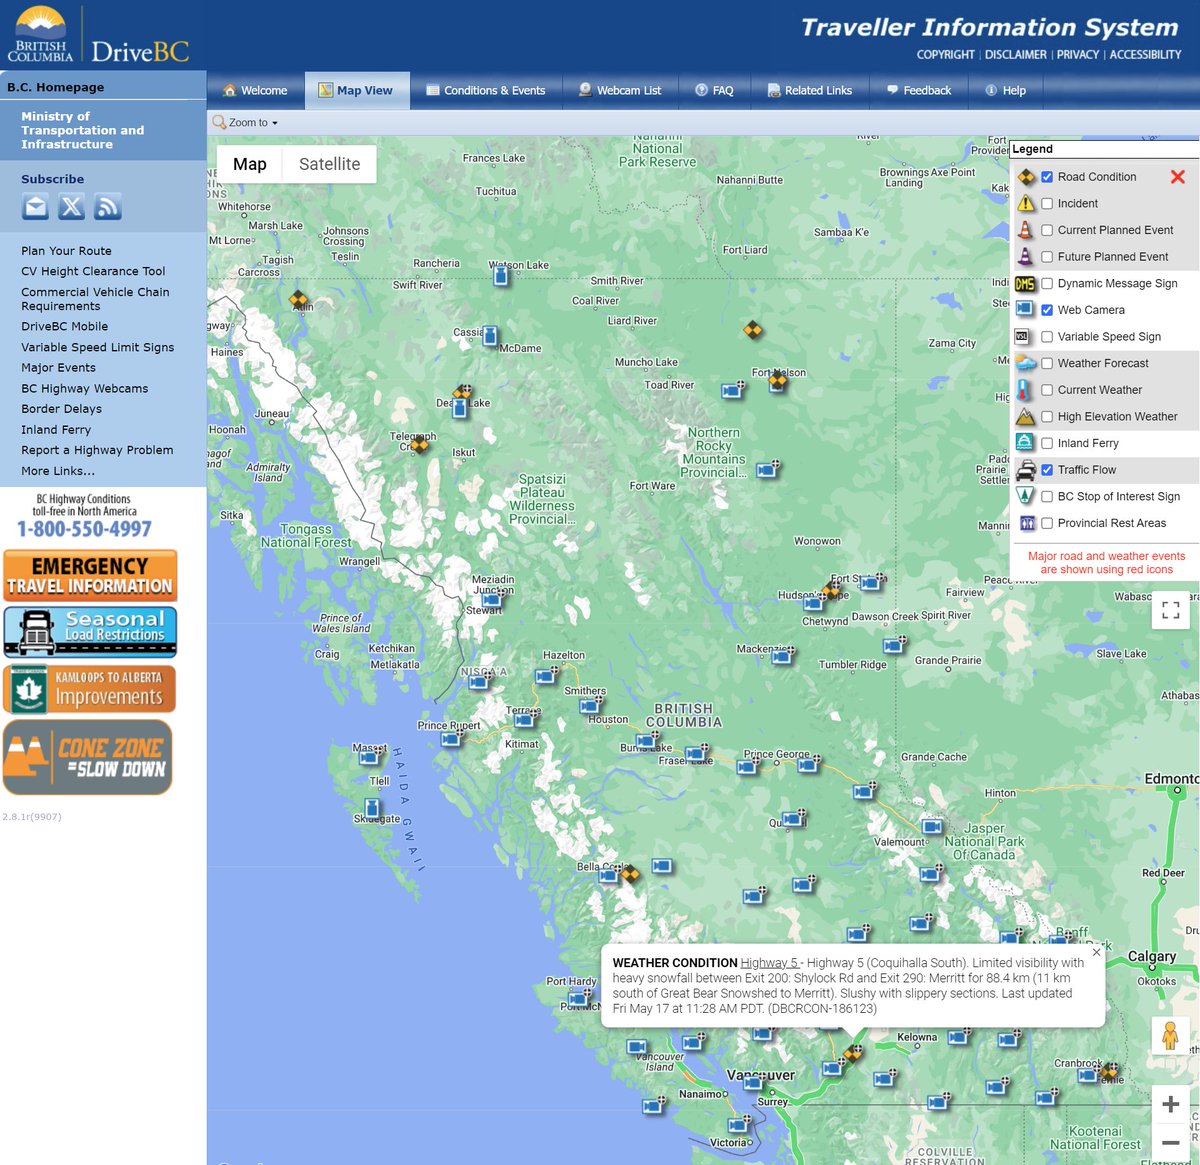 🗺️Weekend travel plans?

#KnowBeforeYouGoBC #BritishColumbia 🔎Review your road conditions, weather forecasts, 1,000+ camera views & more at: DriveBC.ca or drivebc.ca/mobile/.

@511Alberta @511yukon